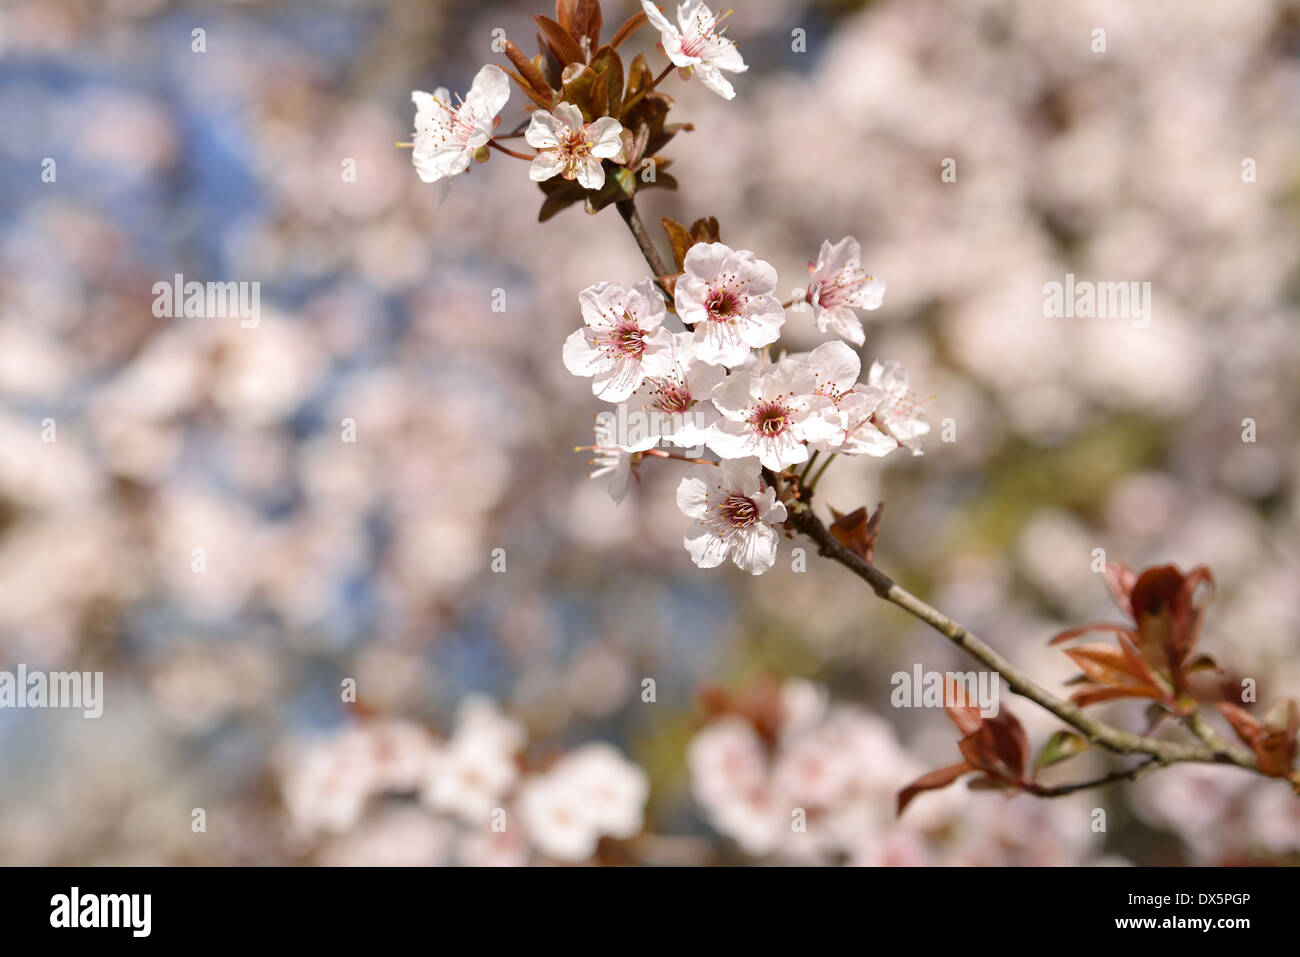 Blooming branch of cherry tree Stock Photo